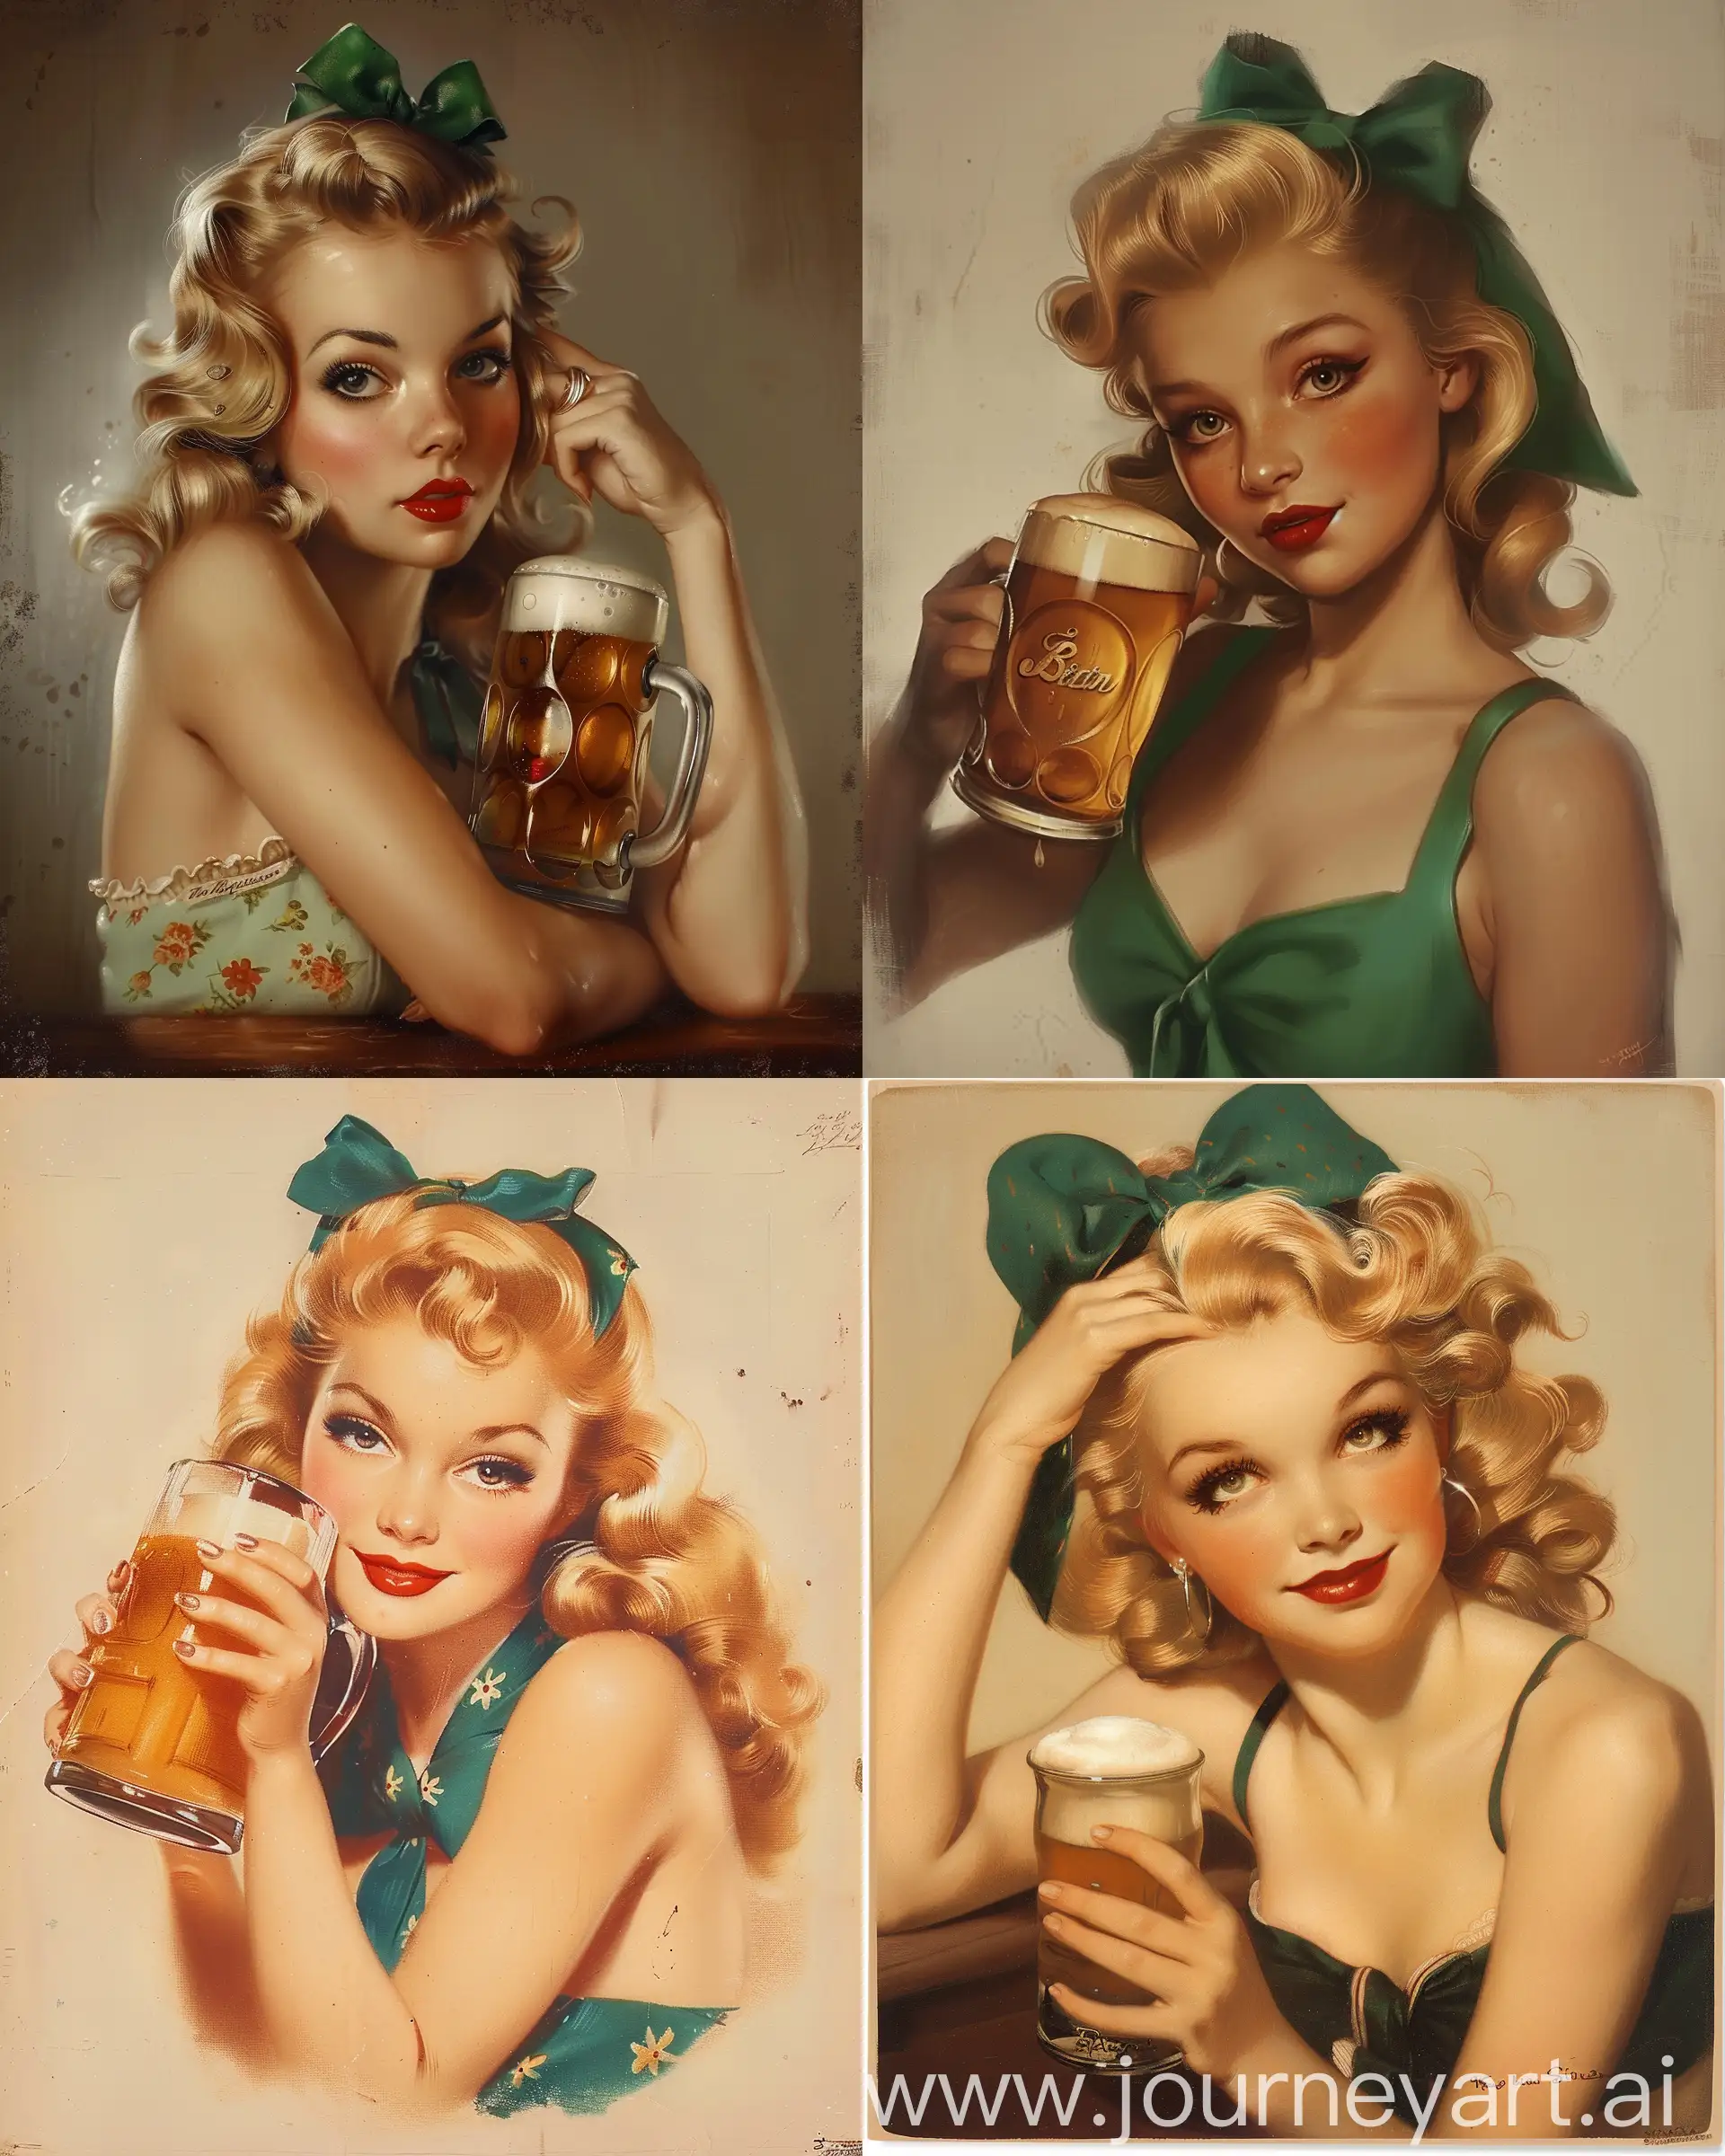 Vintage-Pinup-Girl-with-Frothy-Beer-Mug-in-St-Patricks-Day-Outfit